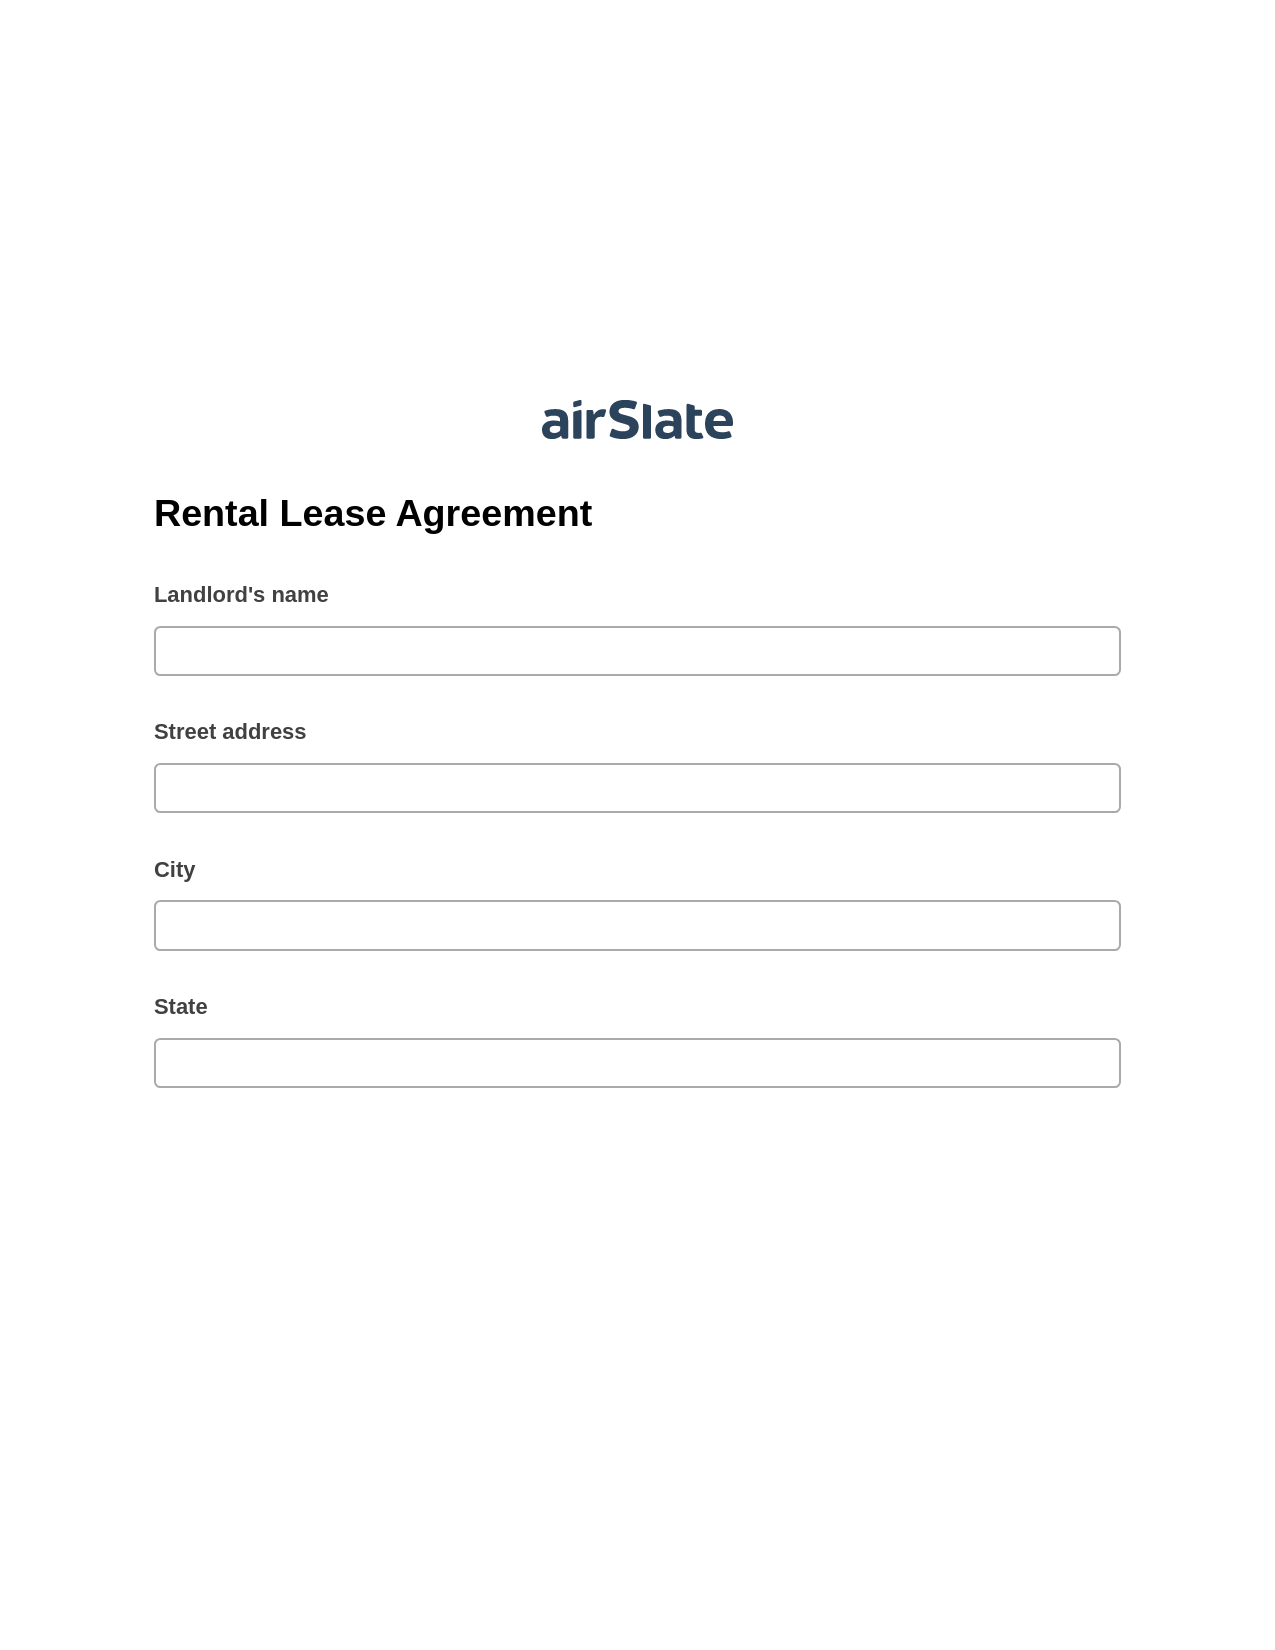 Rental Lease Agreement Pre-fill from Google Sheets Bot, Document Hide Bot, Email Notification Postfinish Bot